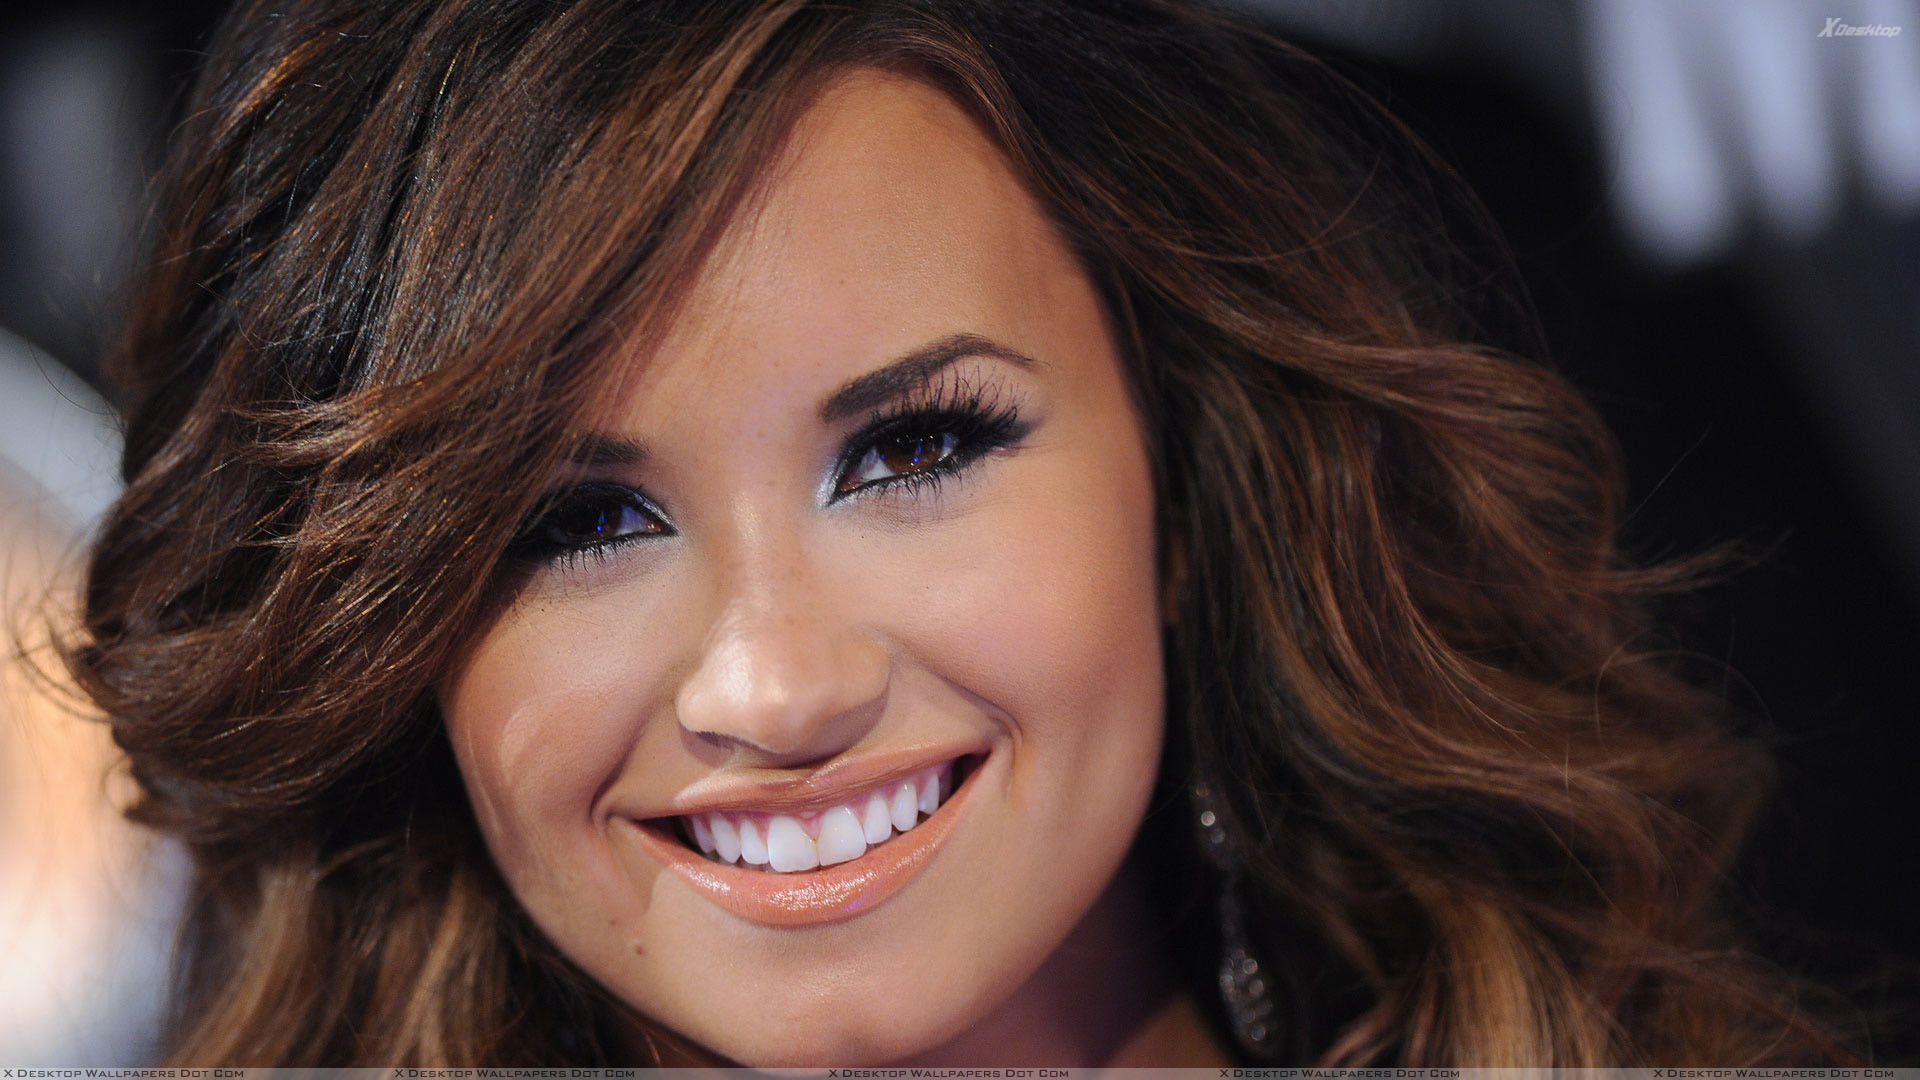 1920x1080 You are viewing wallpaper titled "Demi Lovato Cute Smiling Face ...